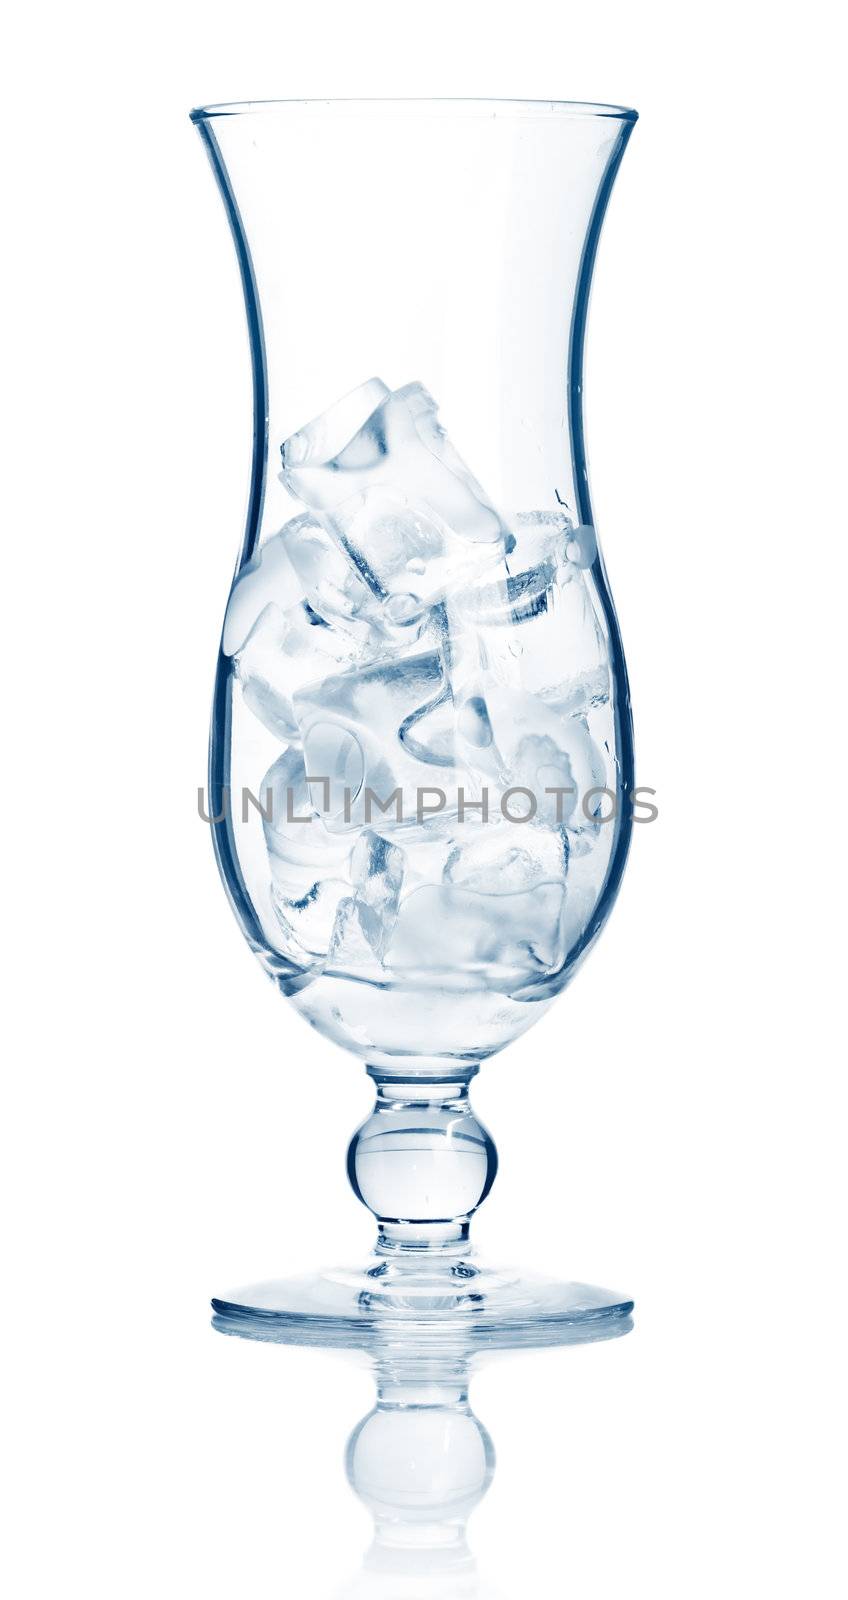 Highball cocktail glass full of ice cubes isolated by alphacell